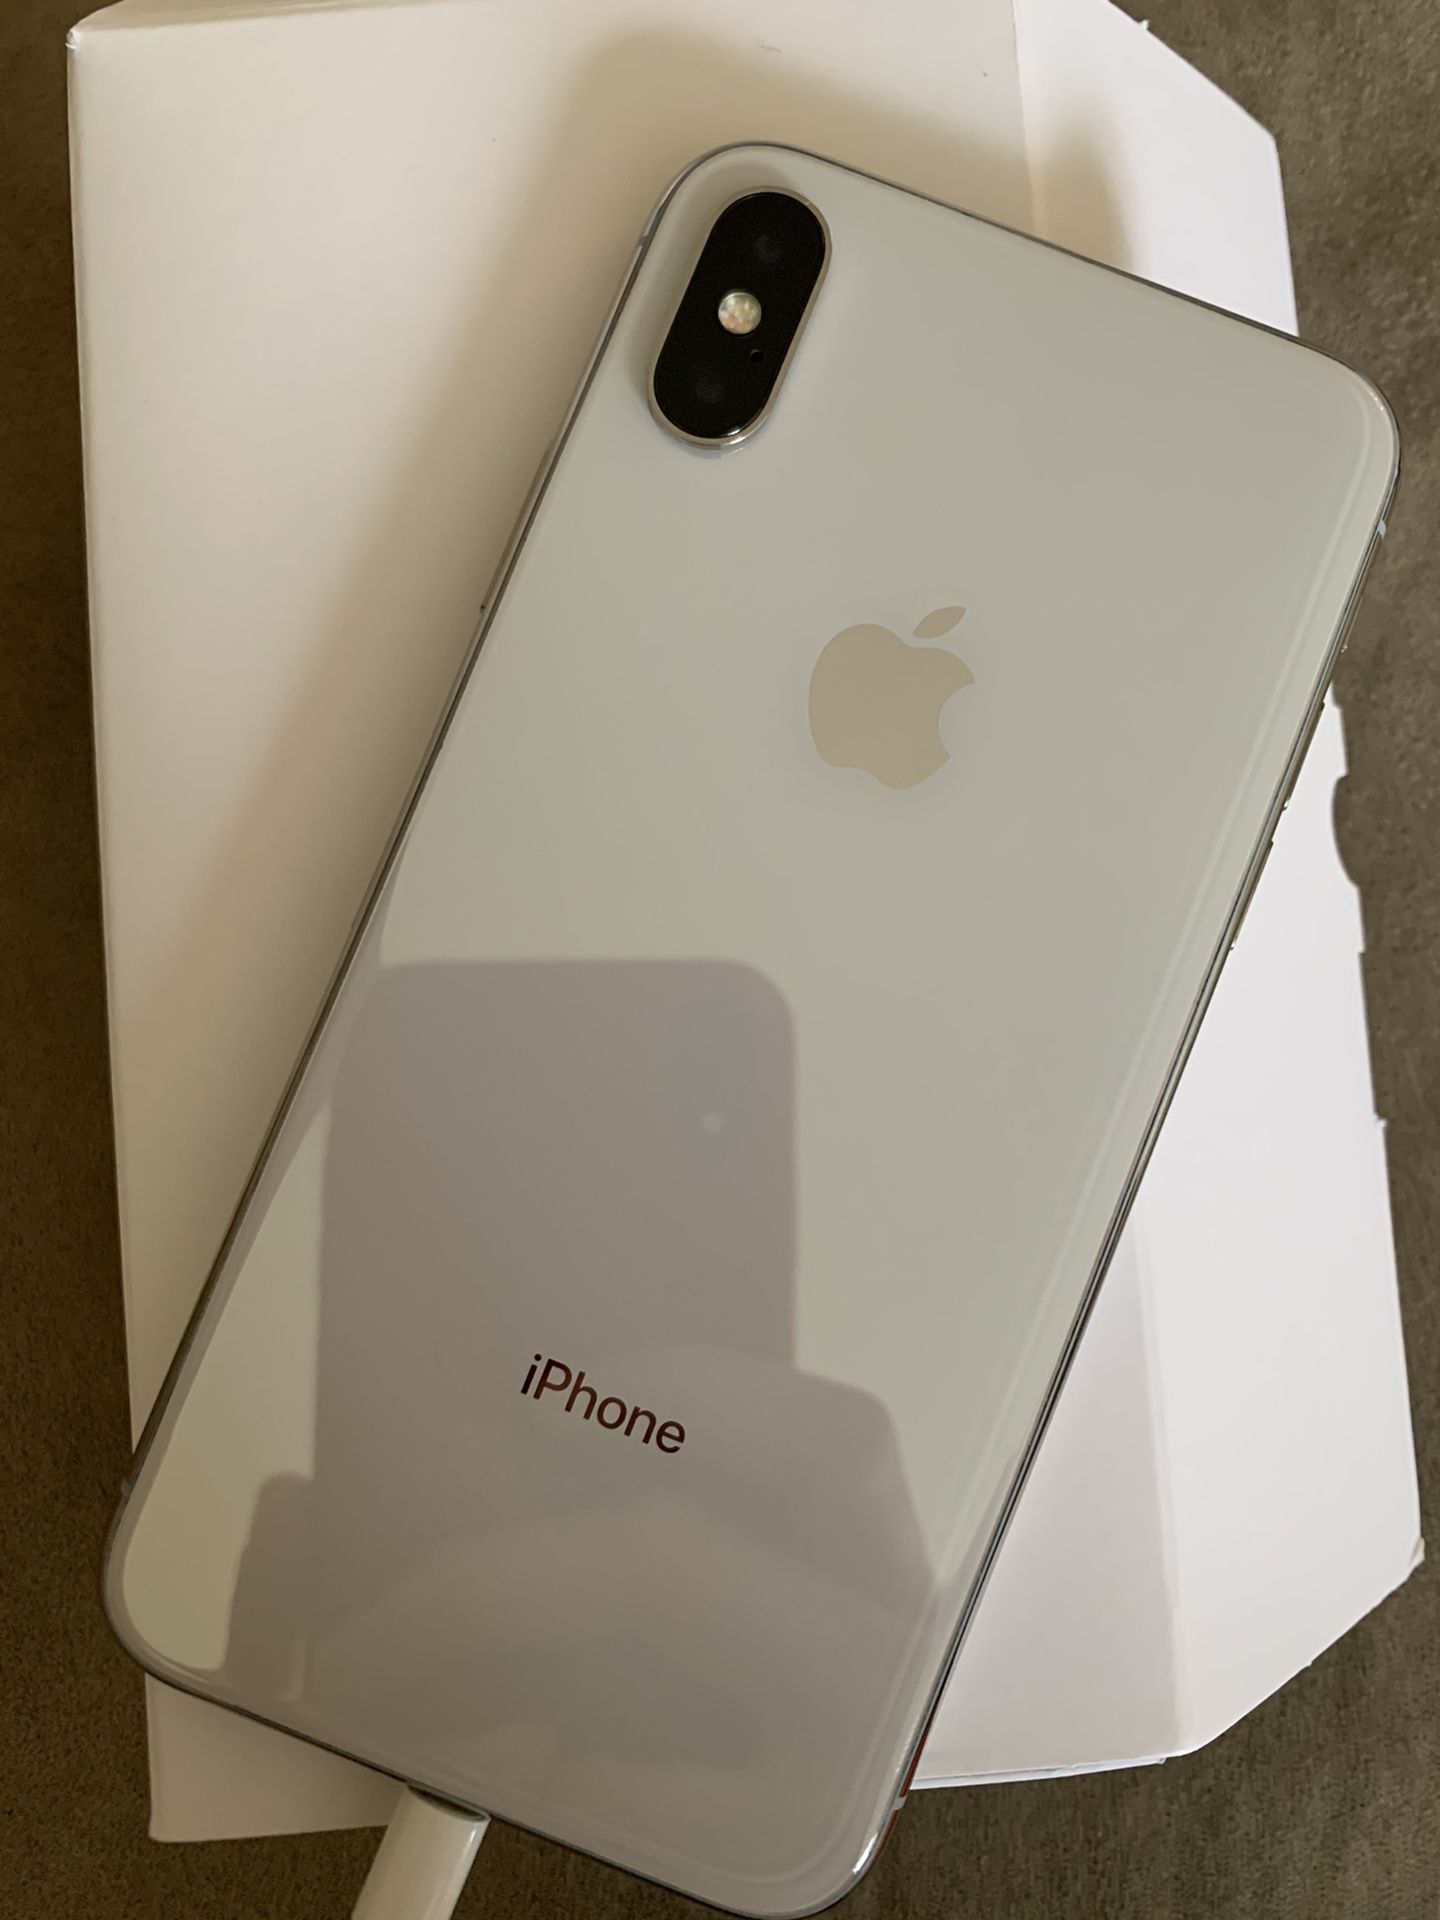 Iphone x ANY CARRIER 256GB